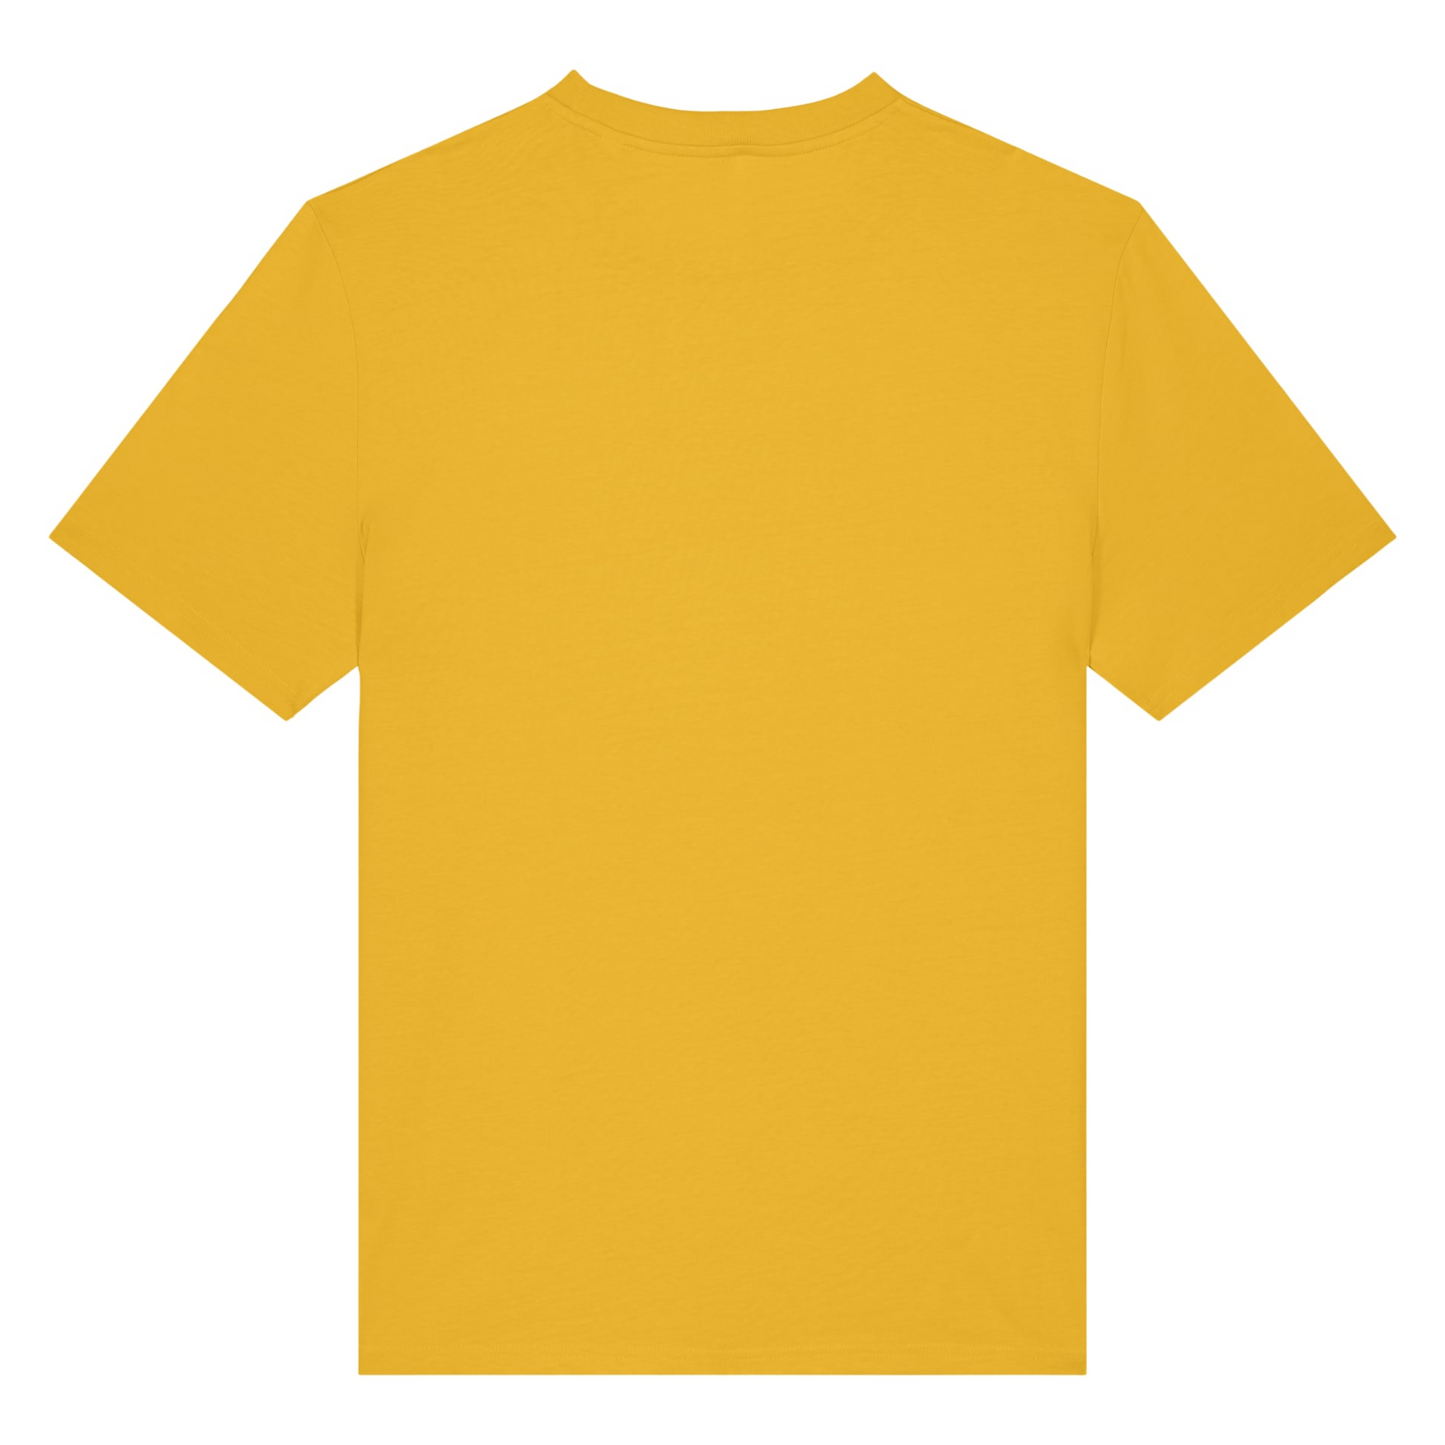 This plain yellow organic cotton t-shirt is actually the back of the Waves and Wild Water Look At The Stars tee. It celebrates bright starry nights after sunlit days and is a nod to the song Yellow by Coldplay. Perfect attire for wild swimmers and sea dippers.